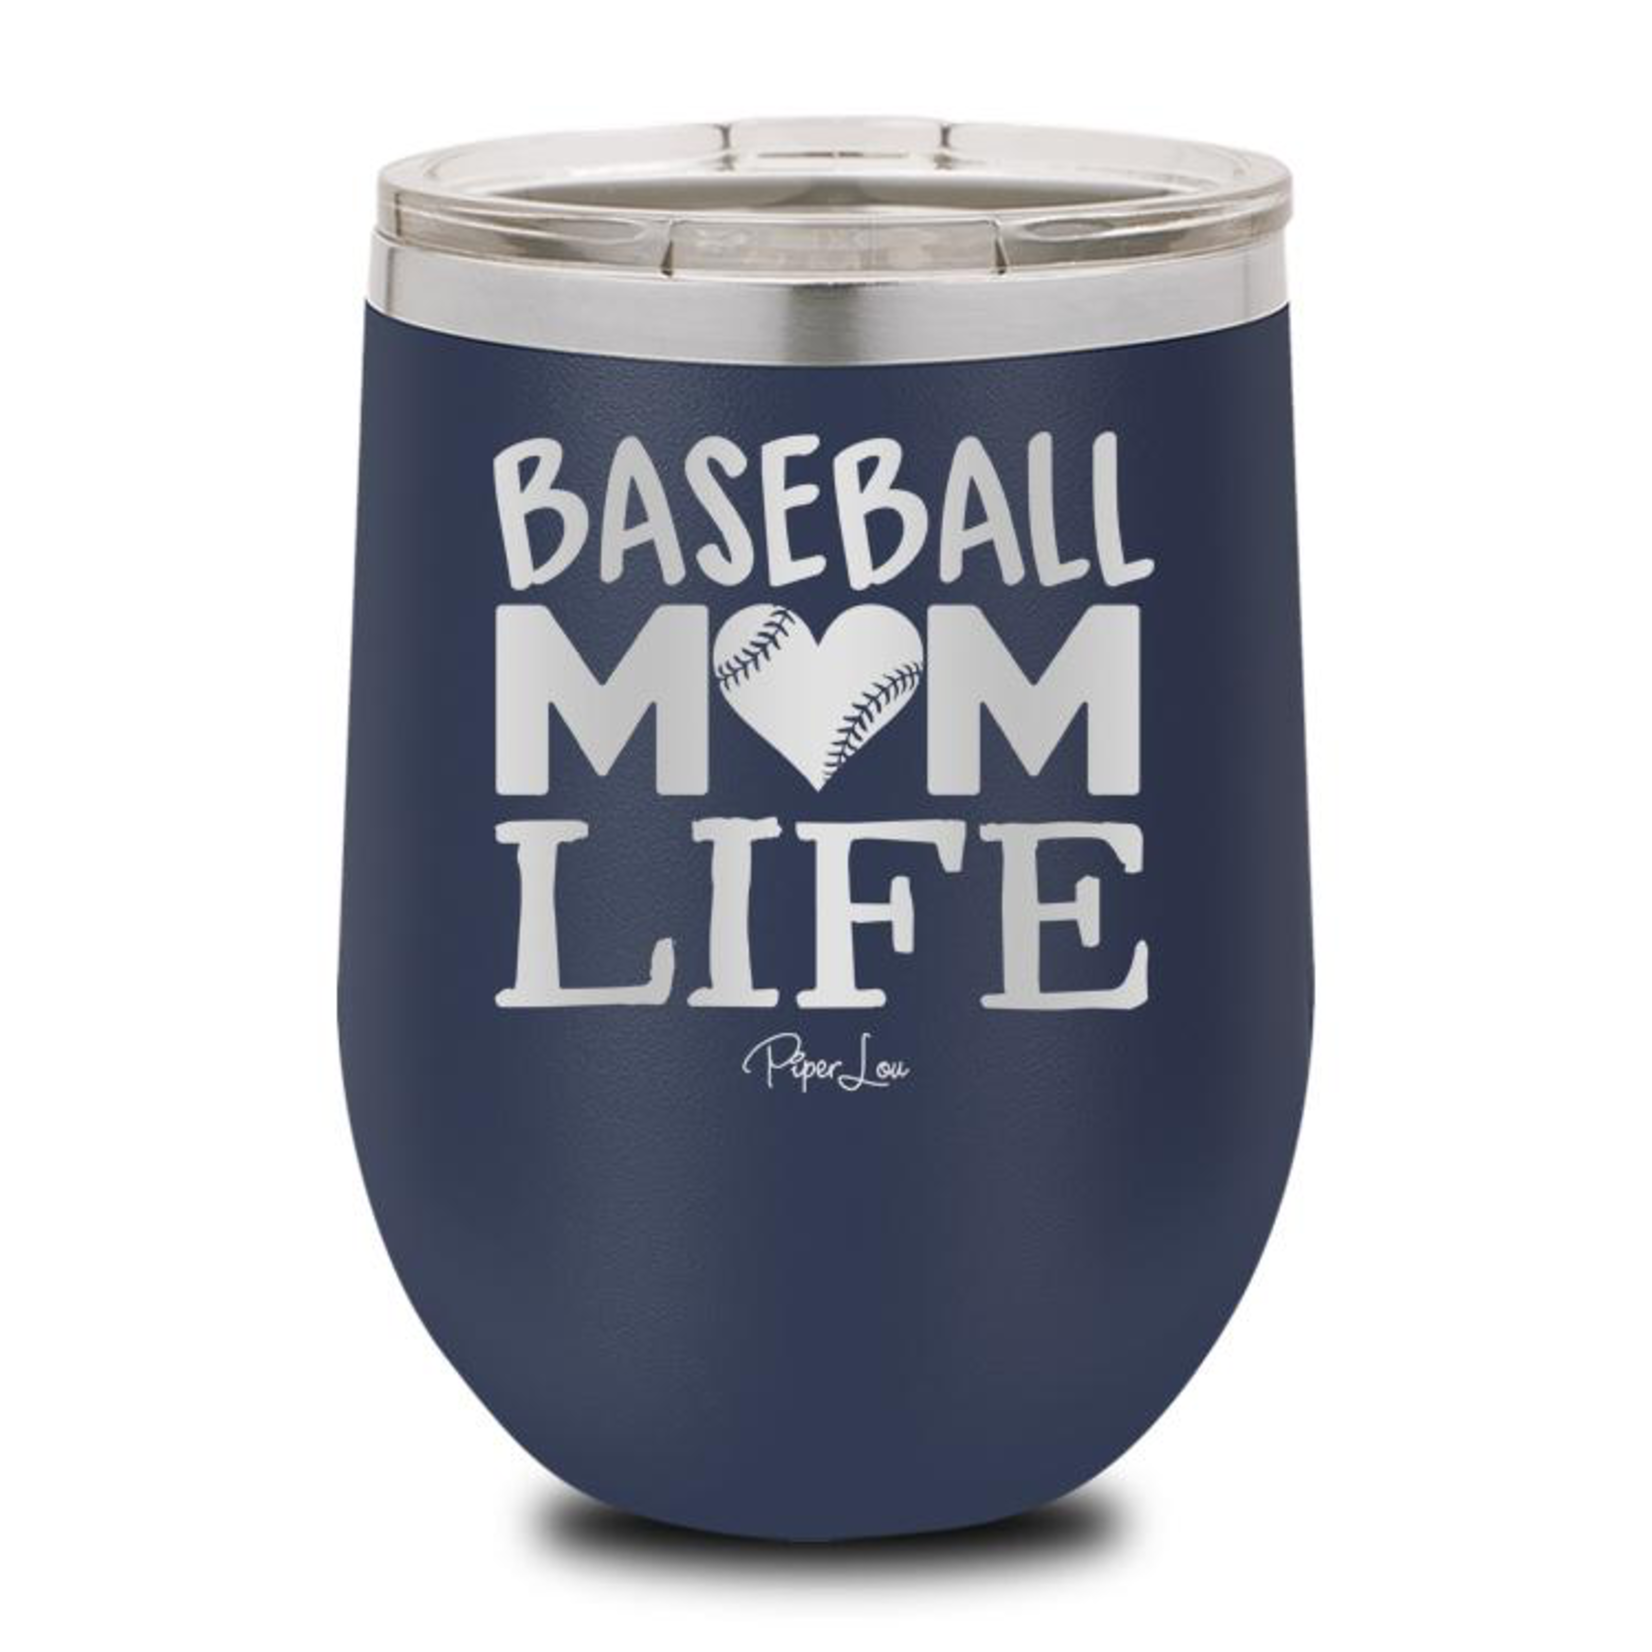 Piper Lou Baseball Mom Wine Cup, sale item, Was $29.99